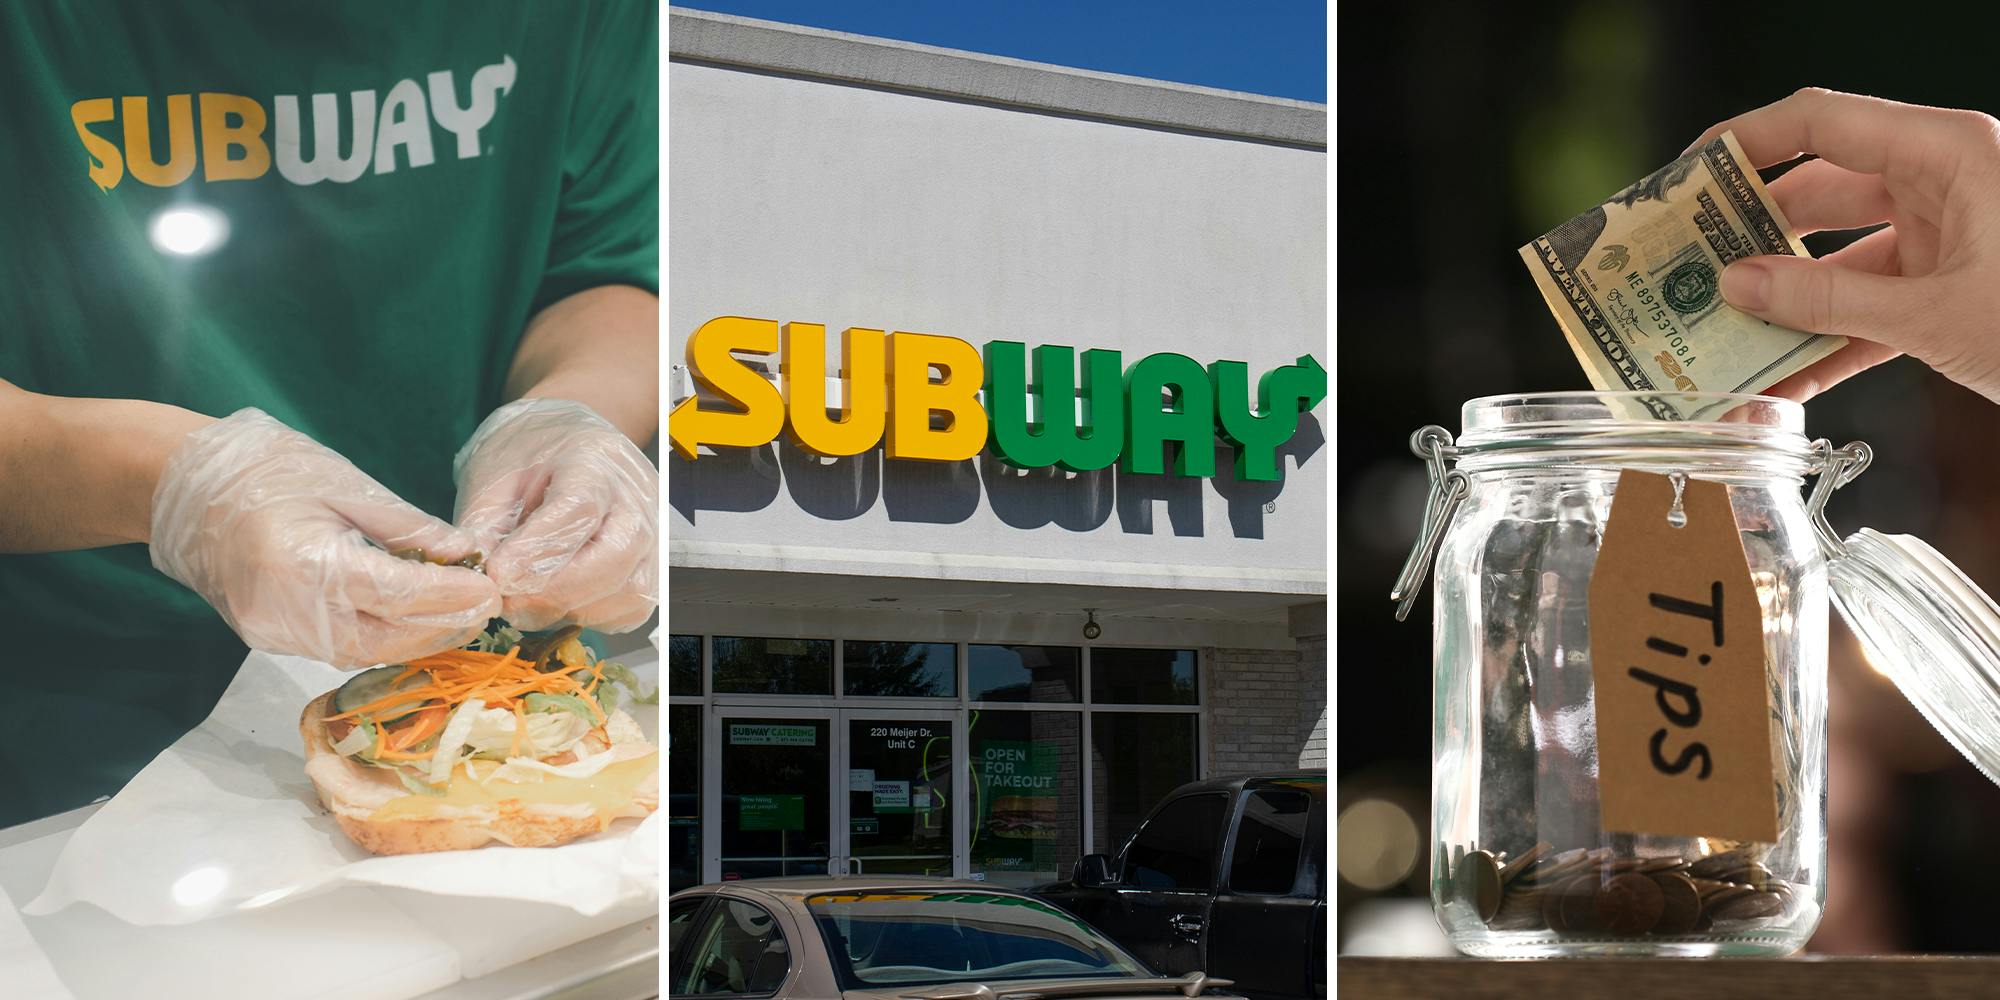 Subway customer says worker gave him attitude for not tipping on $3 bottle of Dasani